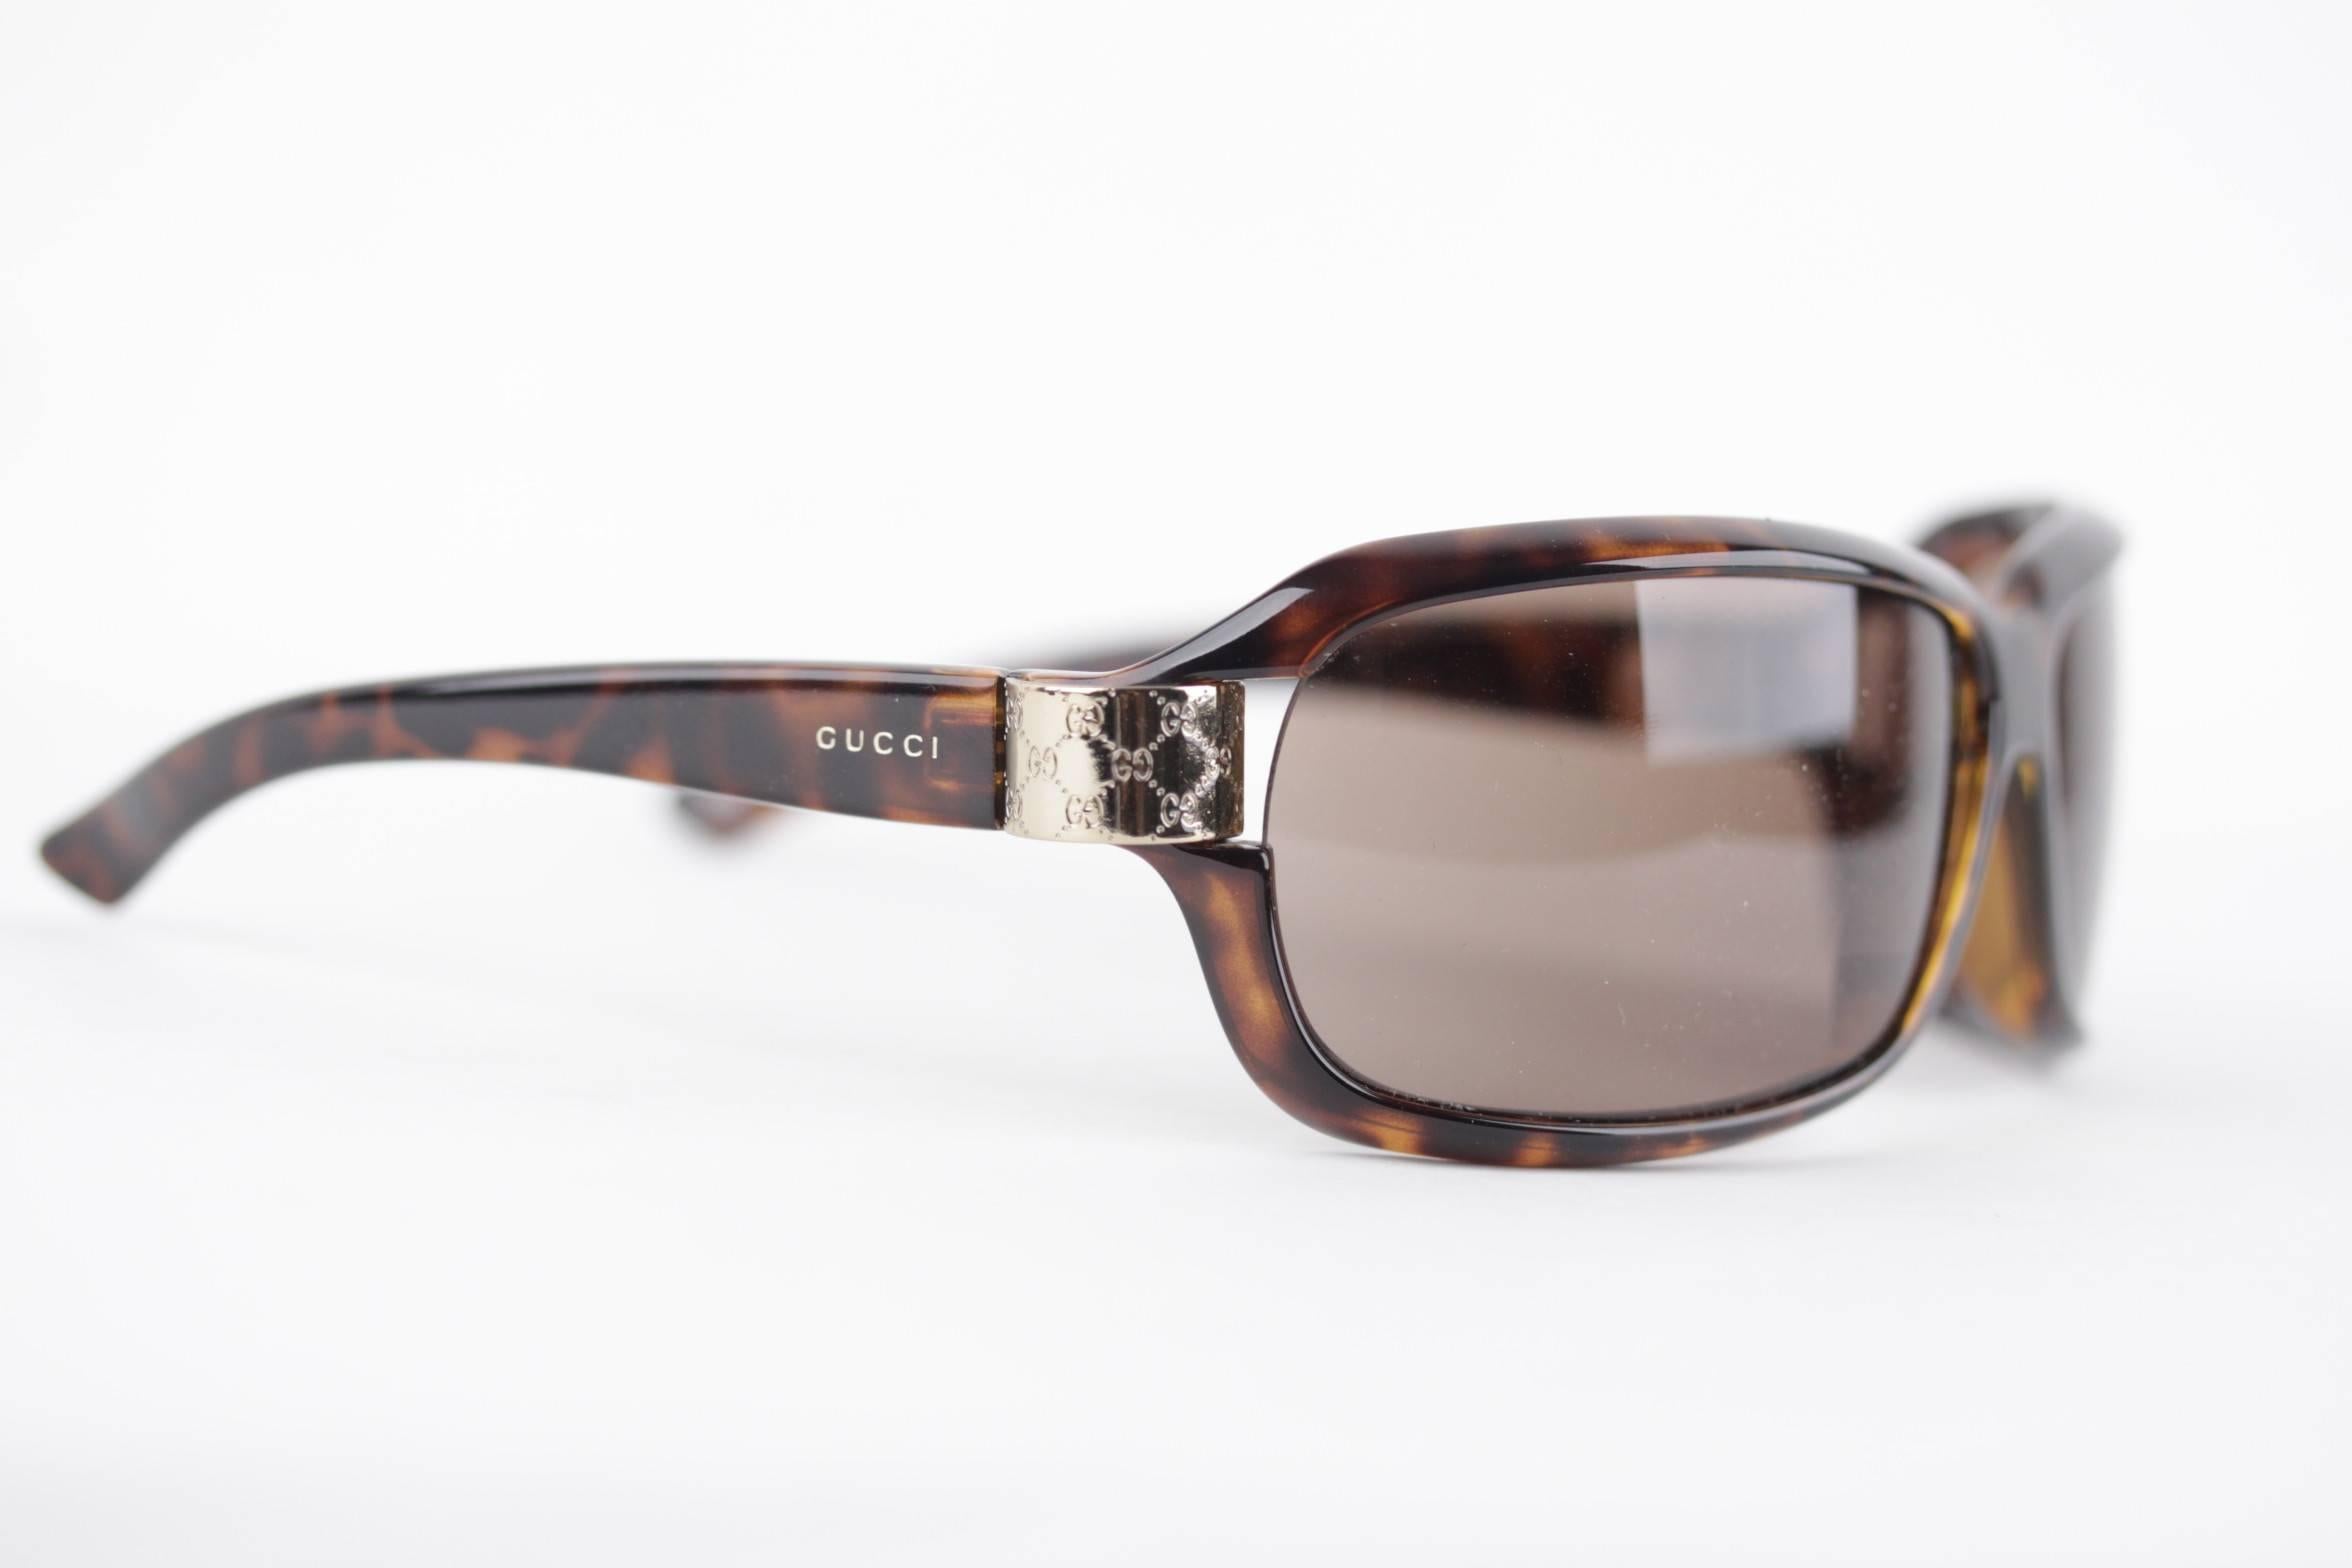 
GUCCI original 100% UV protection lenses
Original green lenses
Brown Tortoise plastic frame
Gold-tone engraved GG-GUCCI monograms on temples
Mod. GG 2984/N/S V086J 67/13 105
Frame made in Italy

Any other detail which is not mentioned may